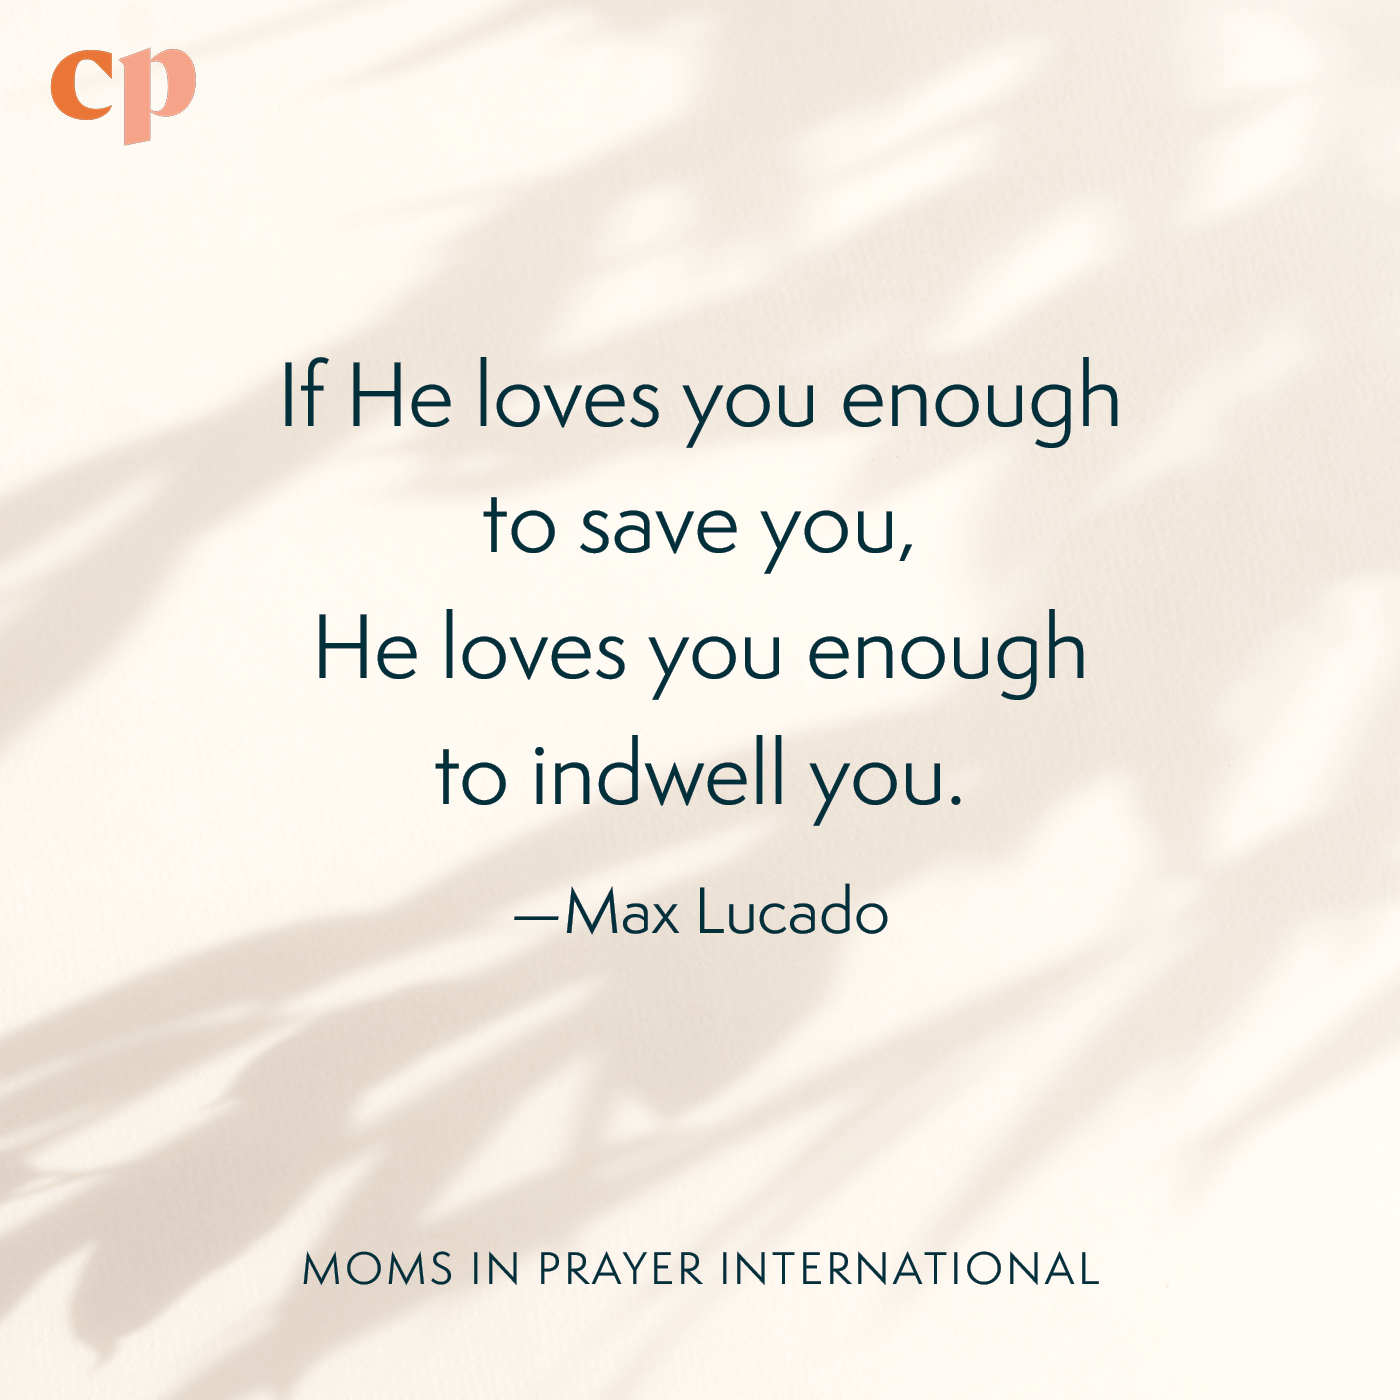 Allow God to work through you, Max Lucado, Moms in Prayer podcast